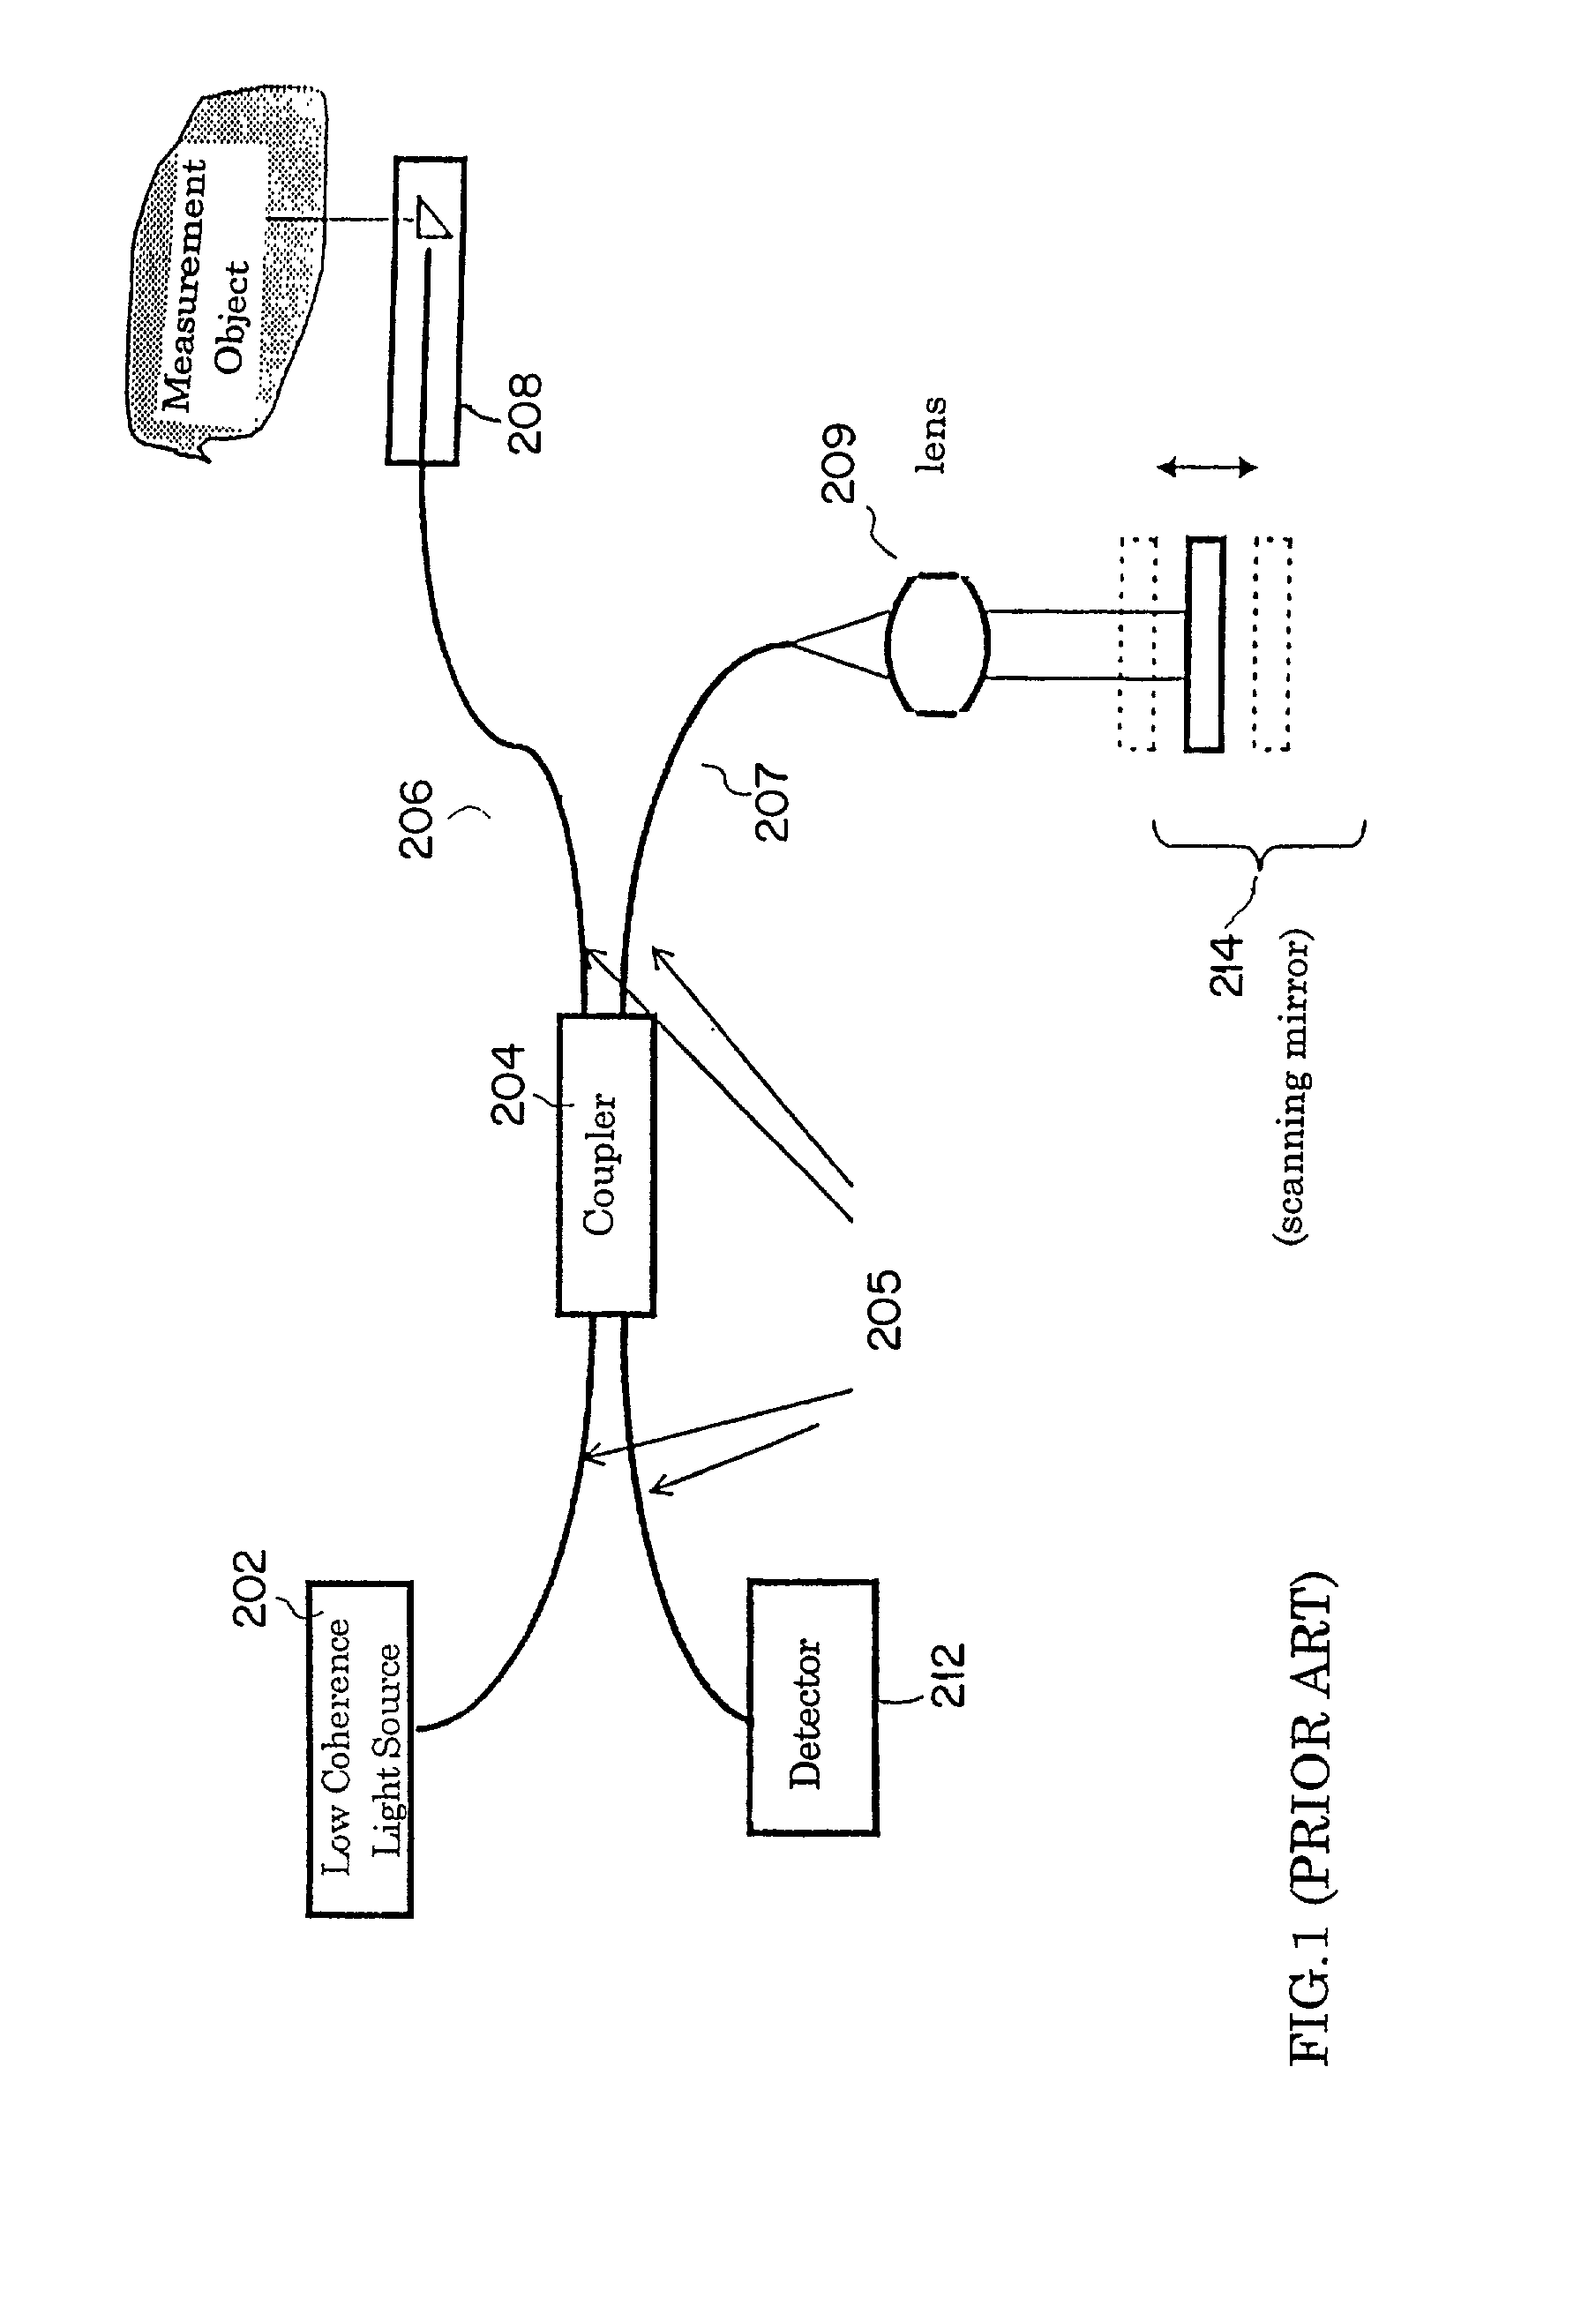 Optical imaging device